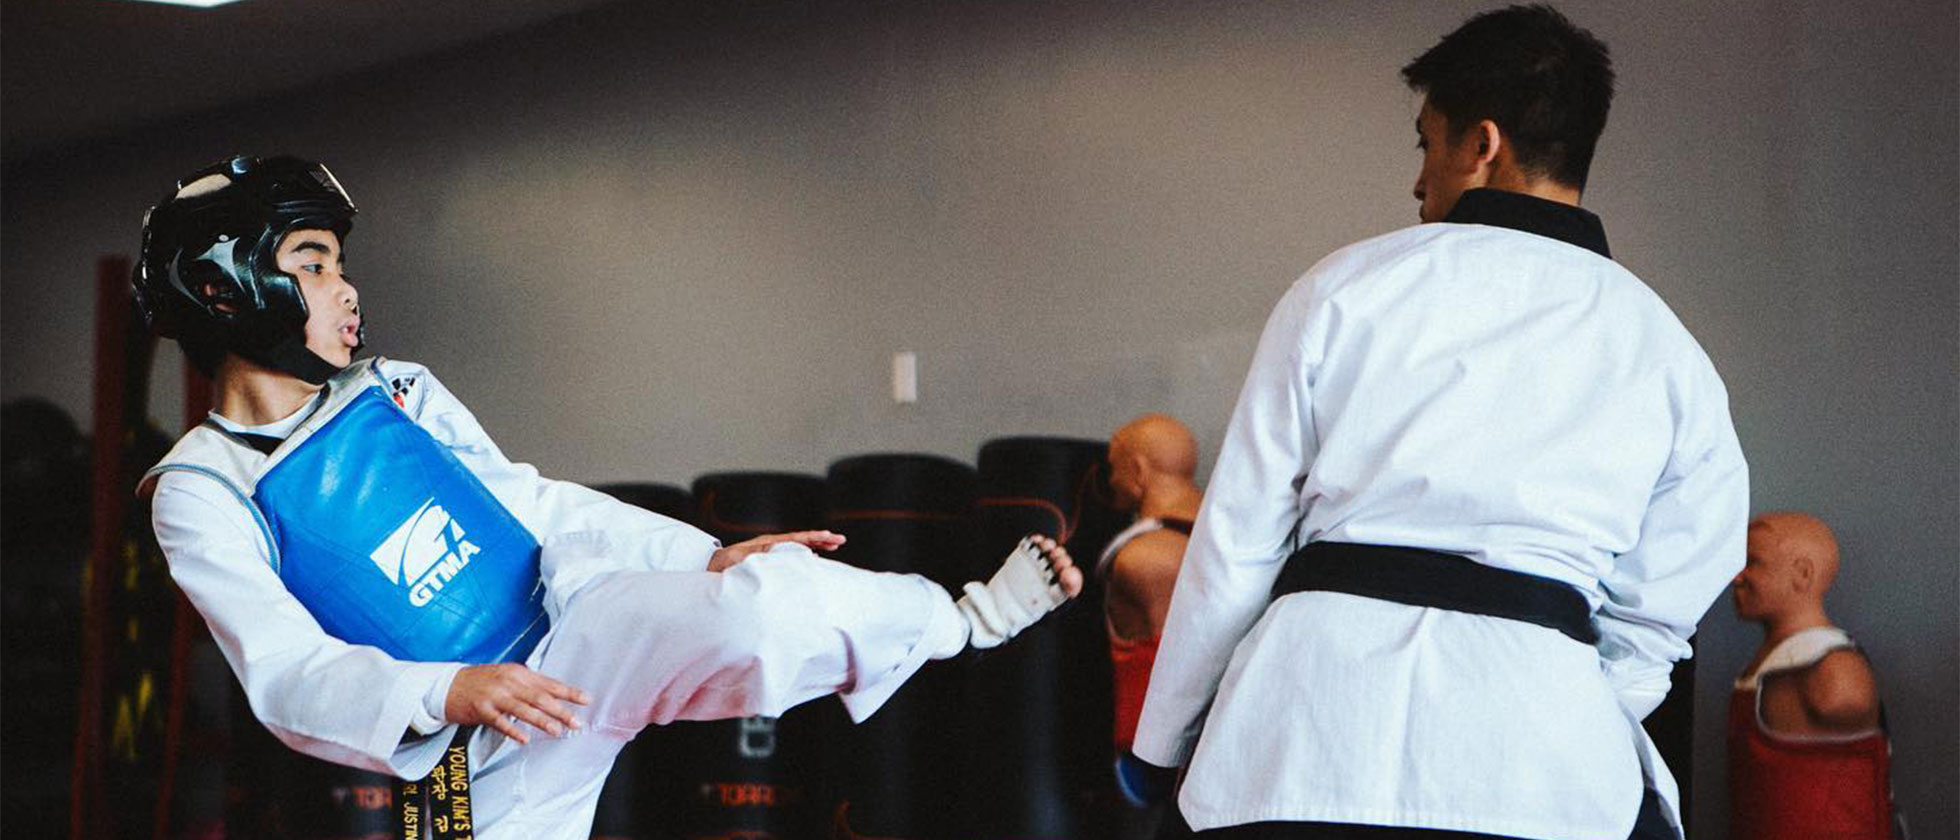 Teen & Adult Martial Arts In La Mirada, California for Ages 13 and Up